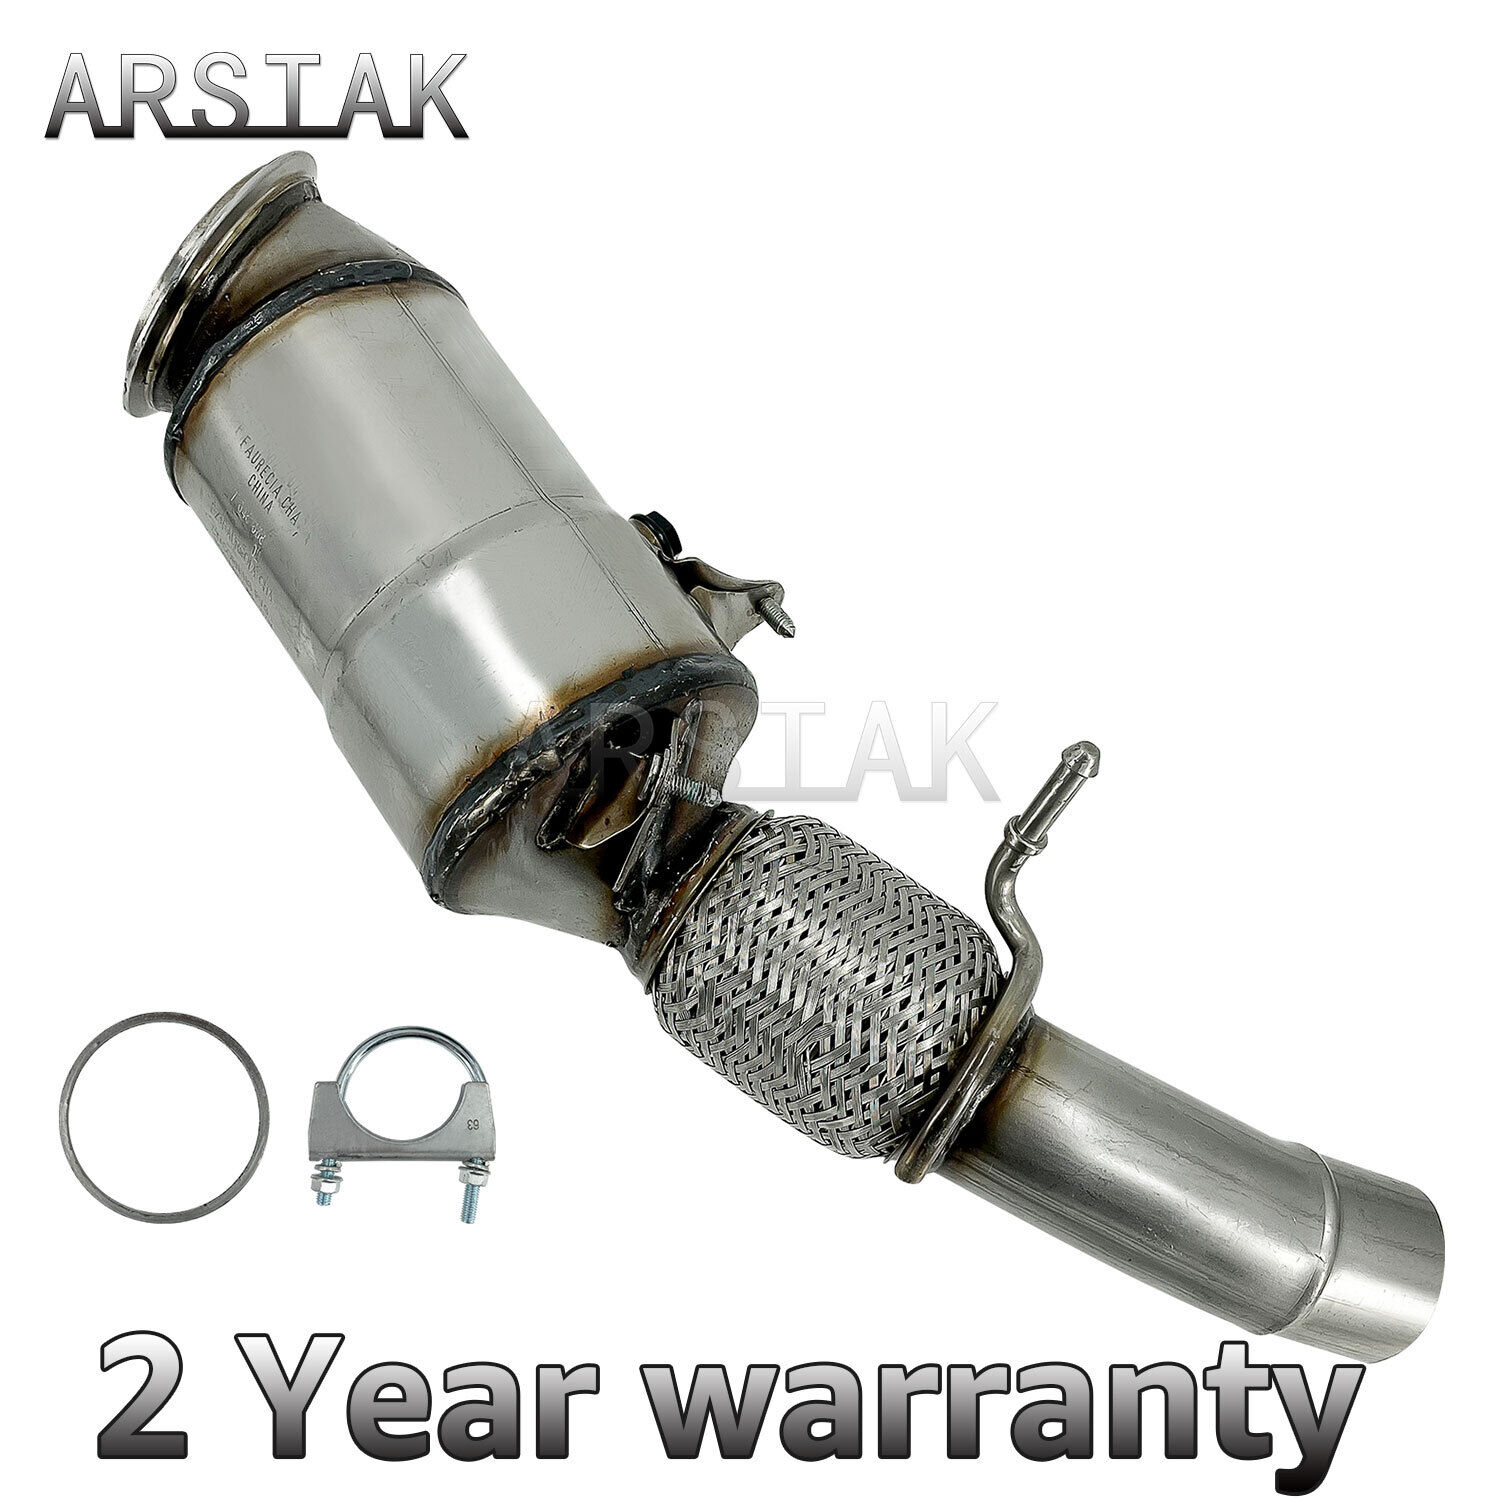 NEW Catalytic Converter 18327646432 For 2013-2017 BMW X1 E84 X3 F25 X4 F26 2.0L